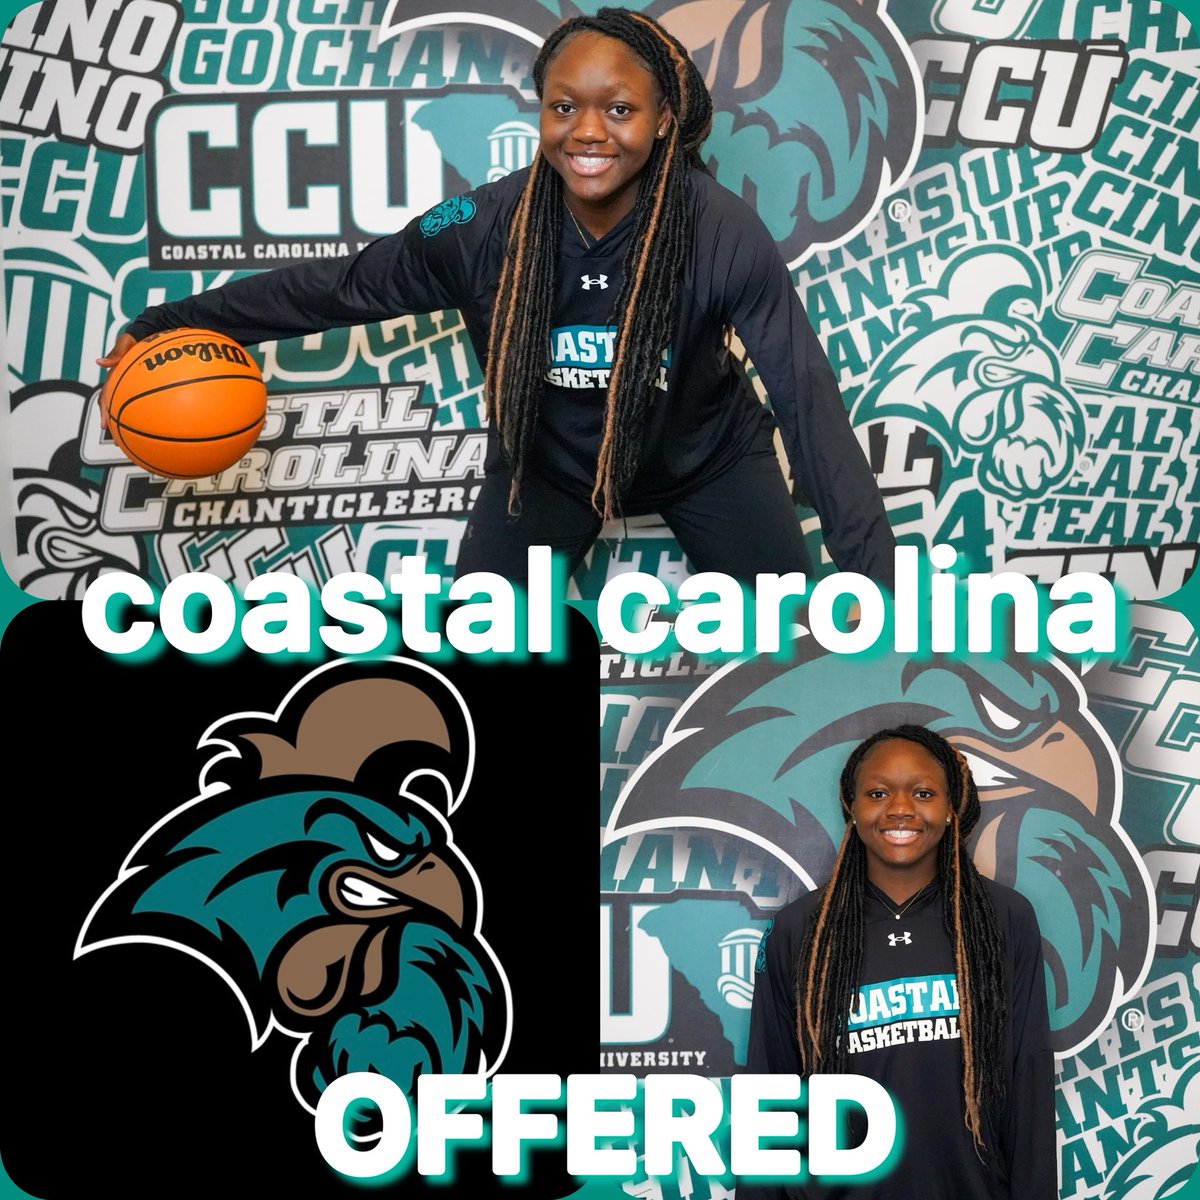 After an amazing unofficial visit I am blessed to receive an offer from Coastal Carolina University! Thank you @the_coachshoe and @CoachKPederson for believing in. #AGTG🙏🏾 #GoChaticleers🩵🤍 @coastalwbb @FBCMotton @CenterCball @sinsavage20 @SouthPointeWBB @CoachSButler @CghrMedia